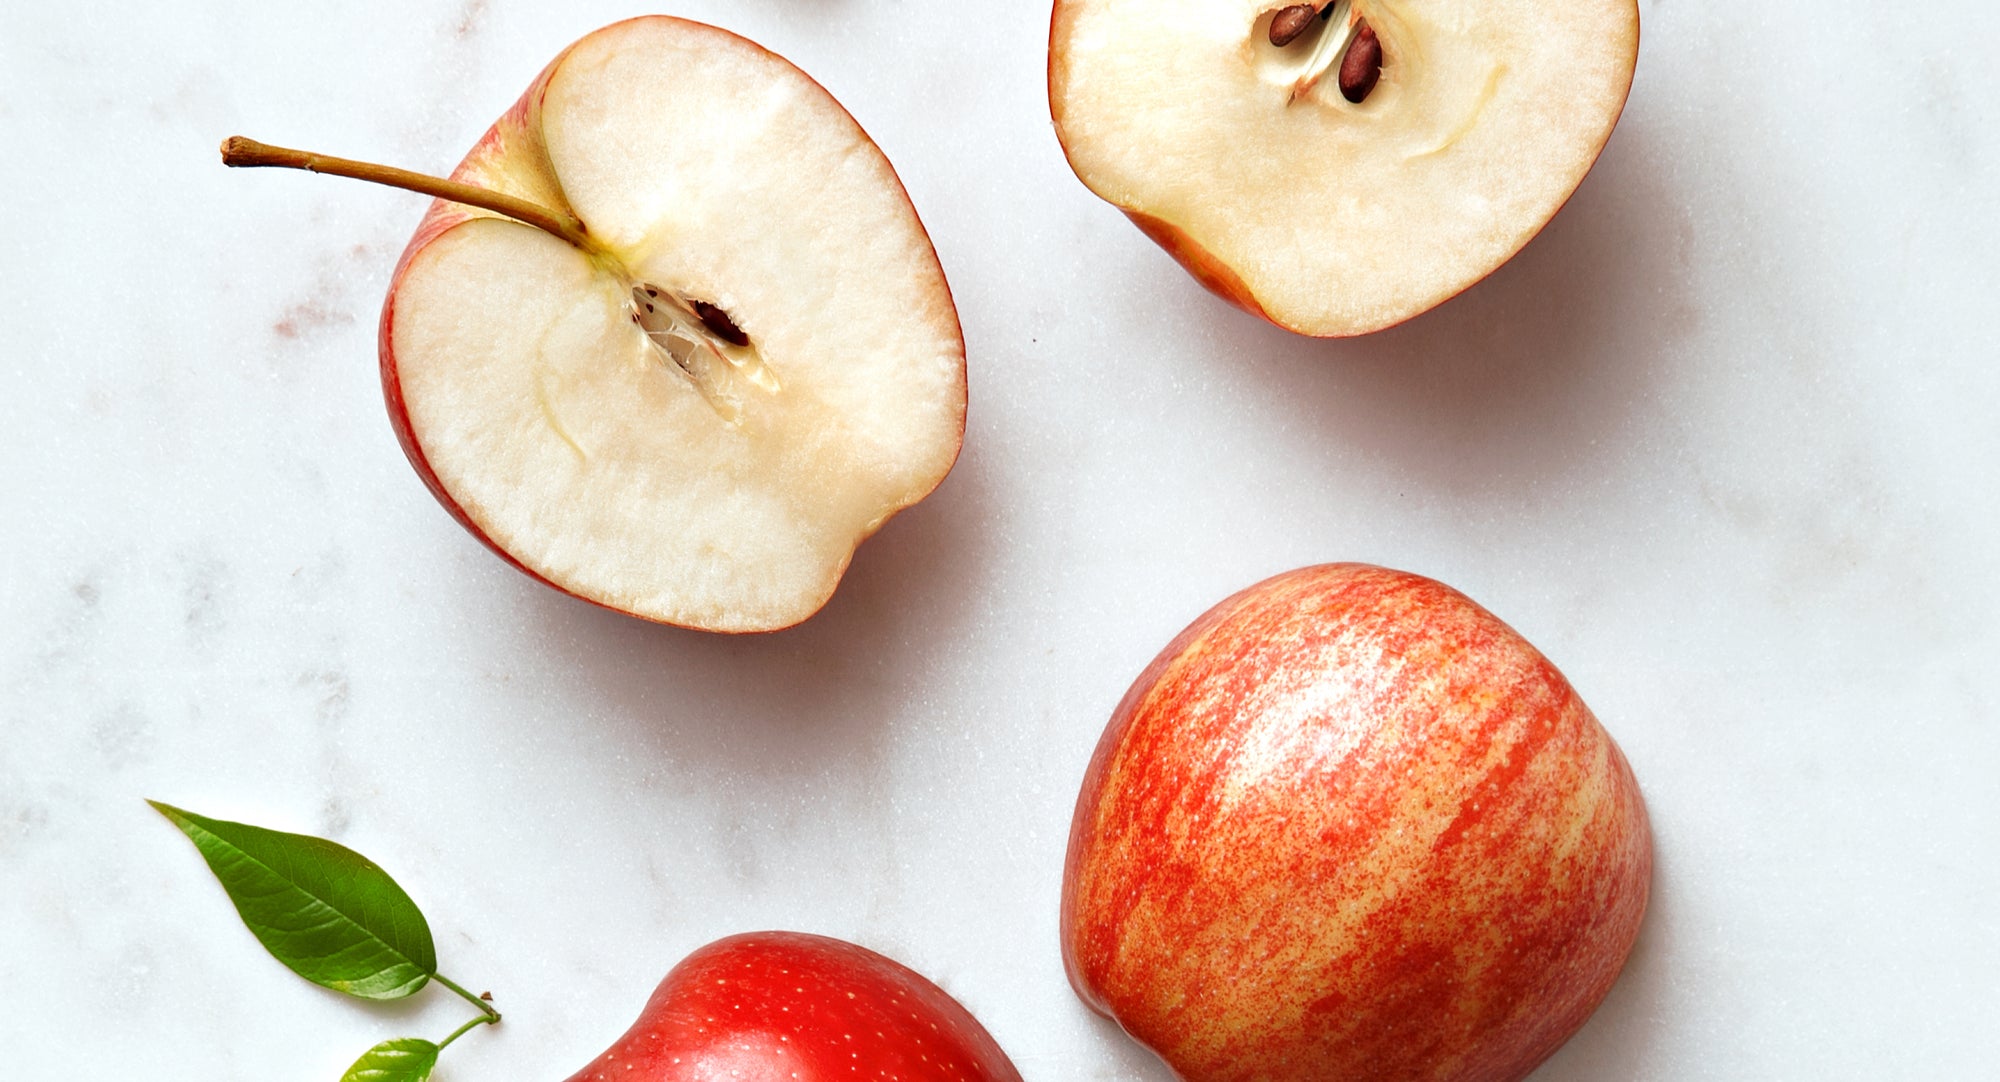 Apples are packed with antioxidants which can help to improve the appearance of the skin and reverse the signs of aging. 